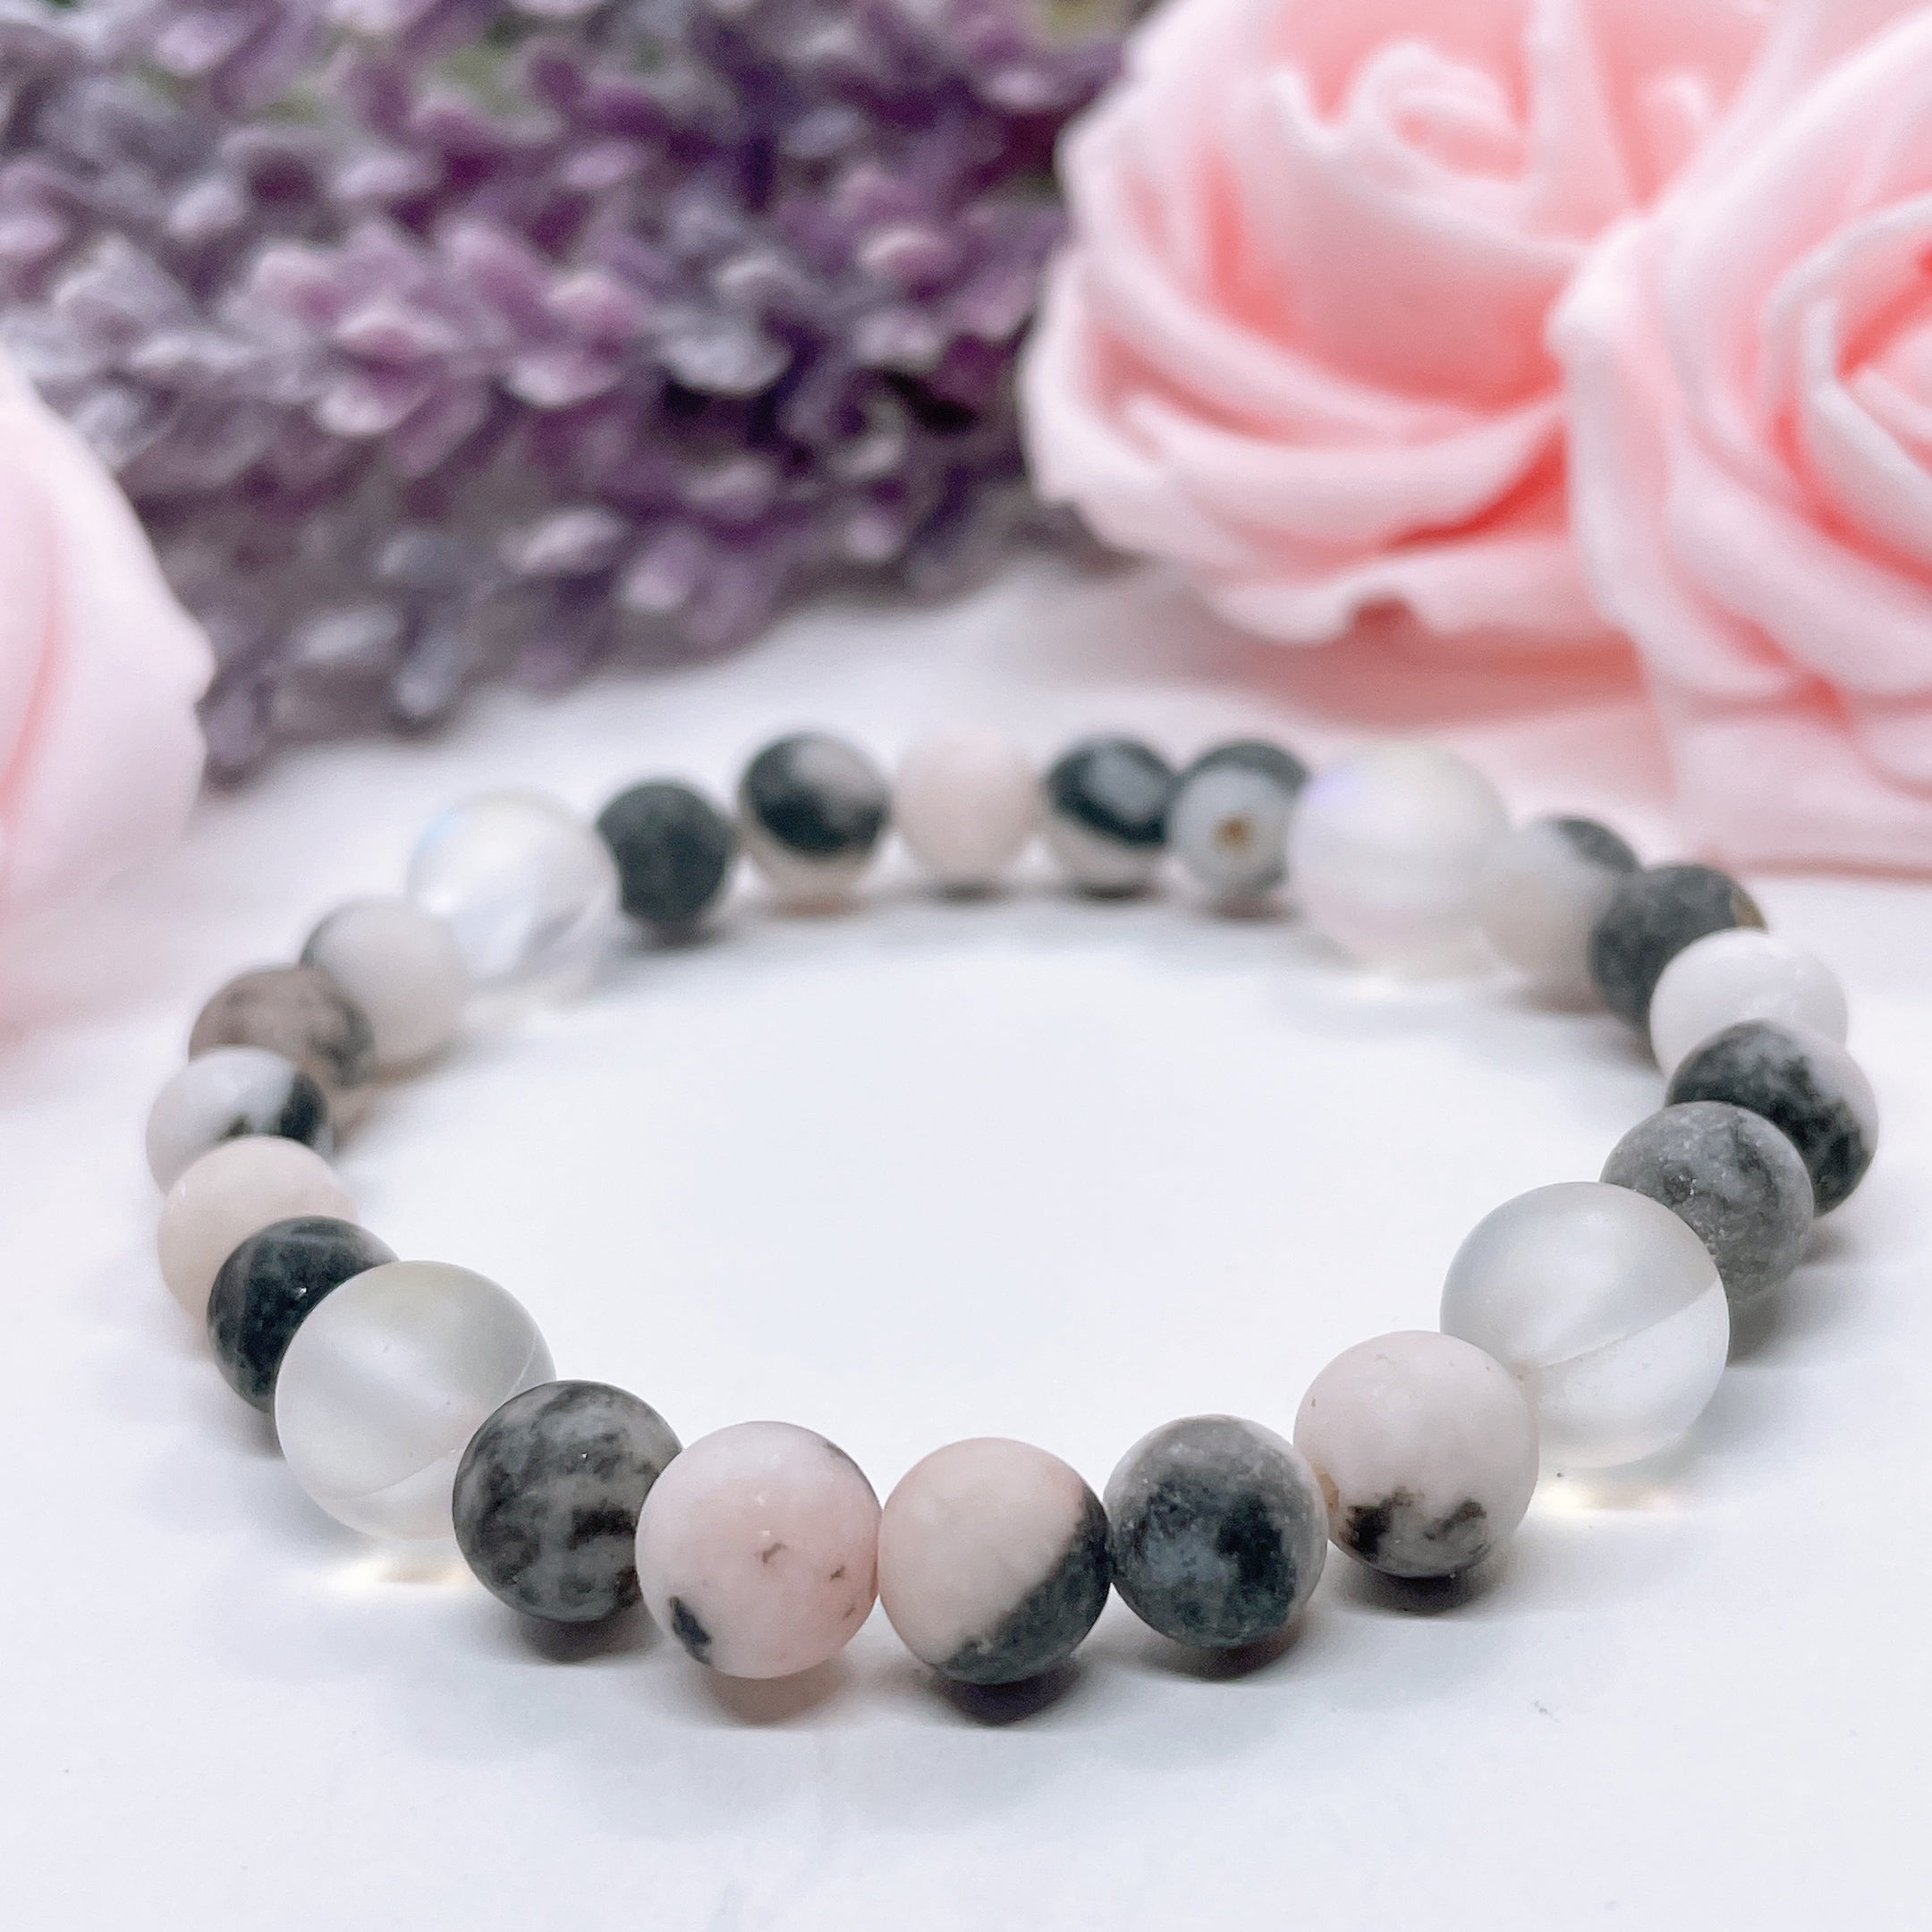 The 5 Second Rule Companion gemstone stretch bracelet made with pink zebra jasper beads and translucent aura beads sits on a white table. Natural neutral colors.